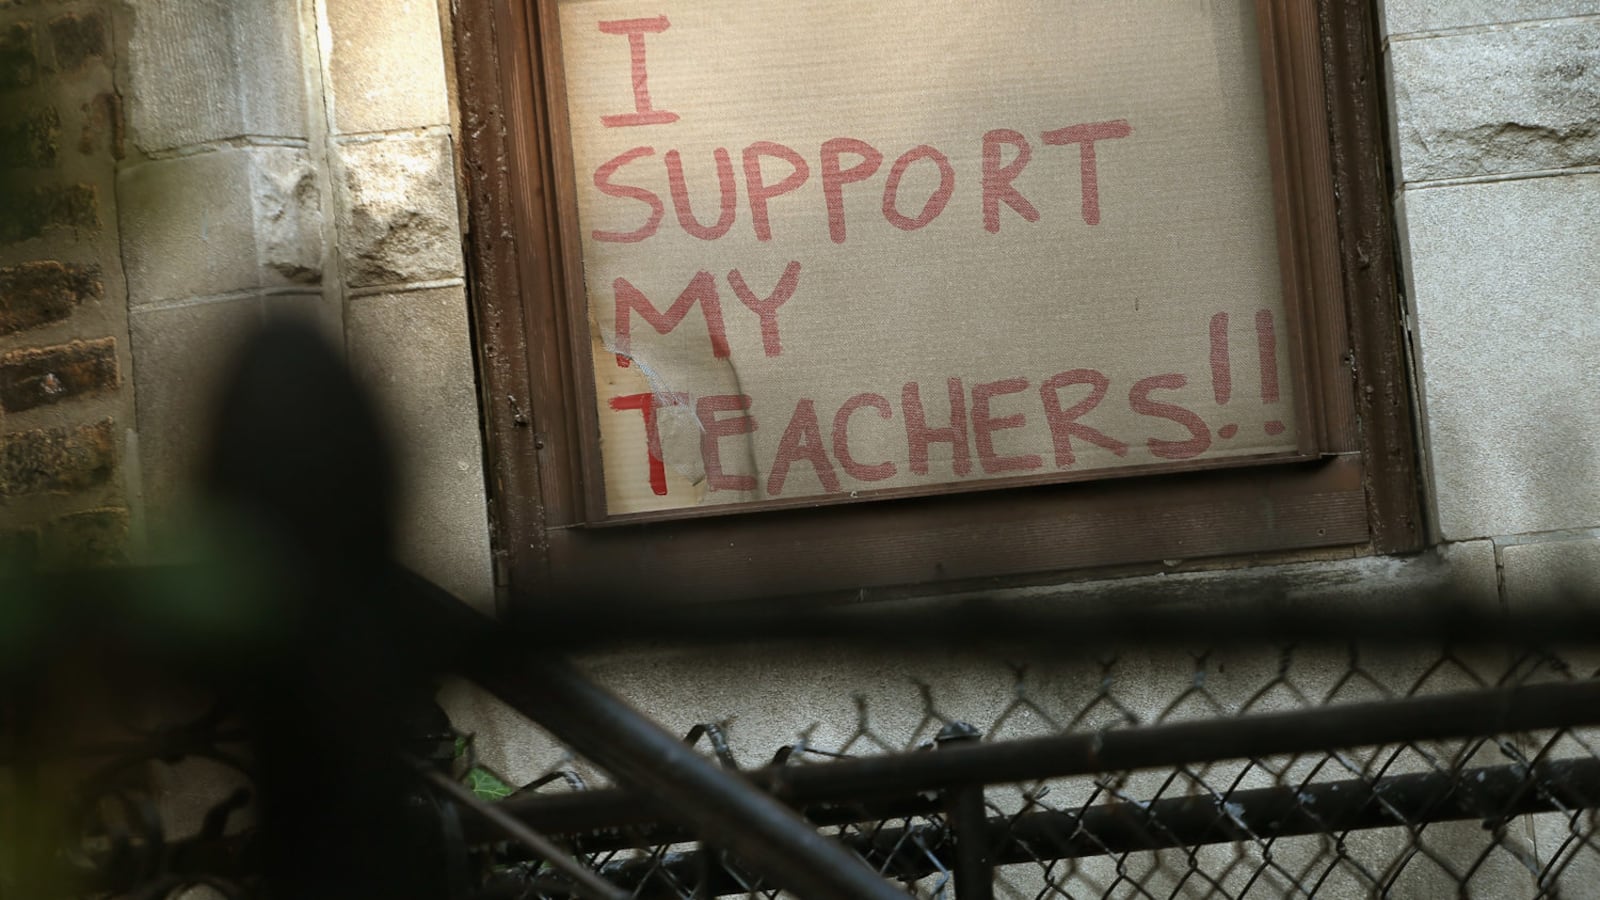 From a previous strike: A sign supporting teachers sits in the window of a home during the 2012 teacher strike